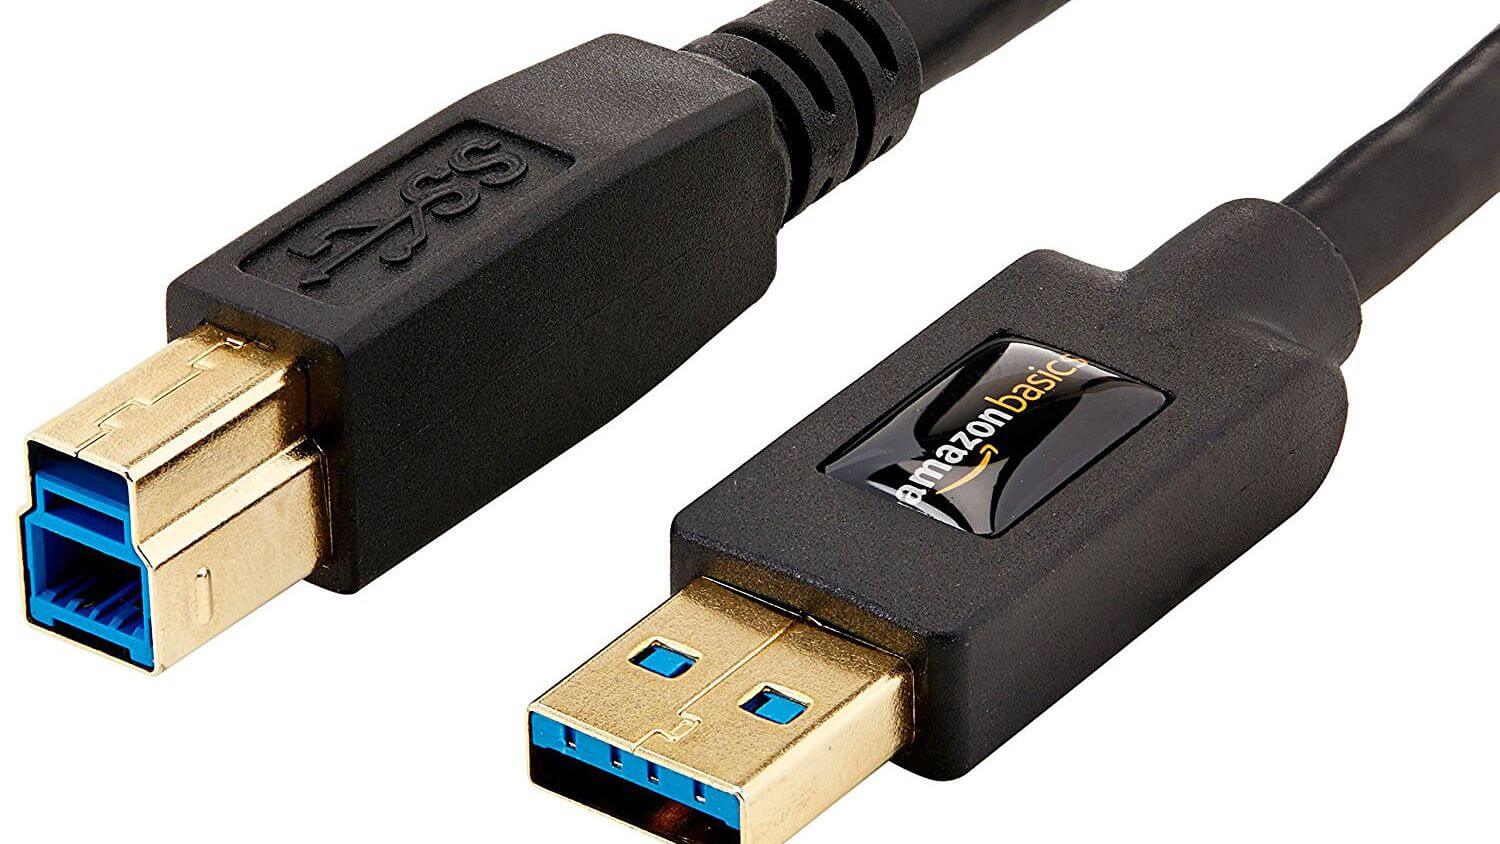 Use-Different-USB-Cable-1